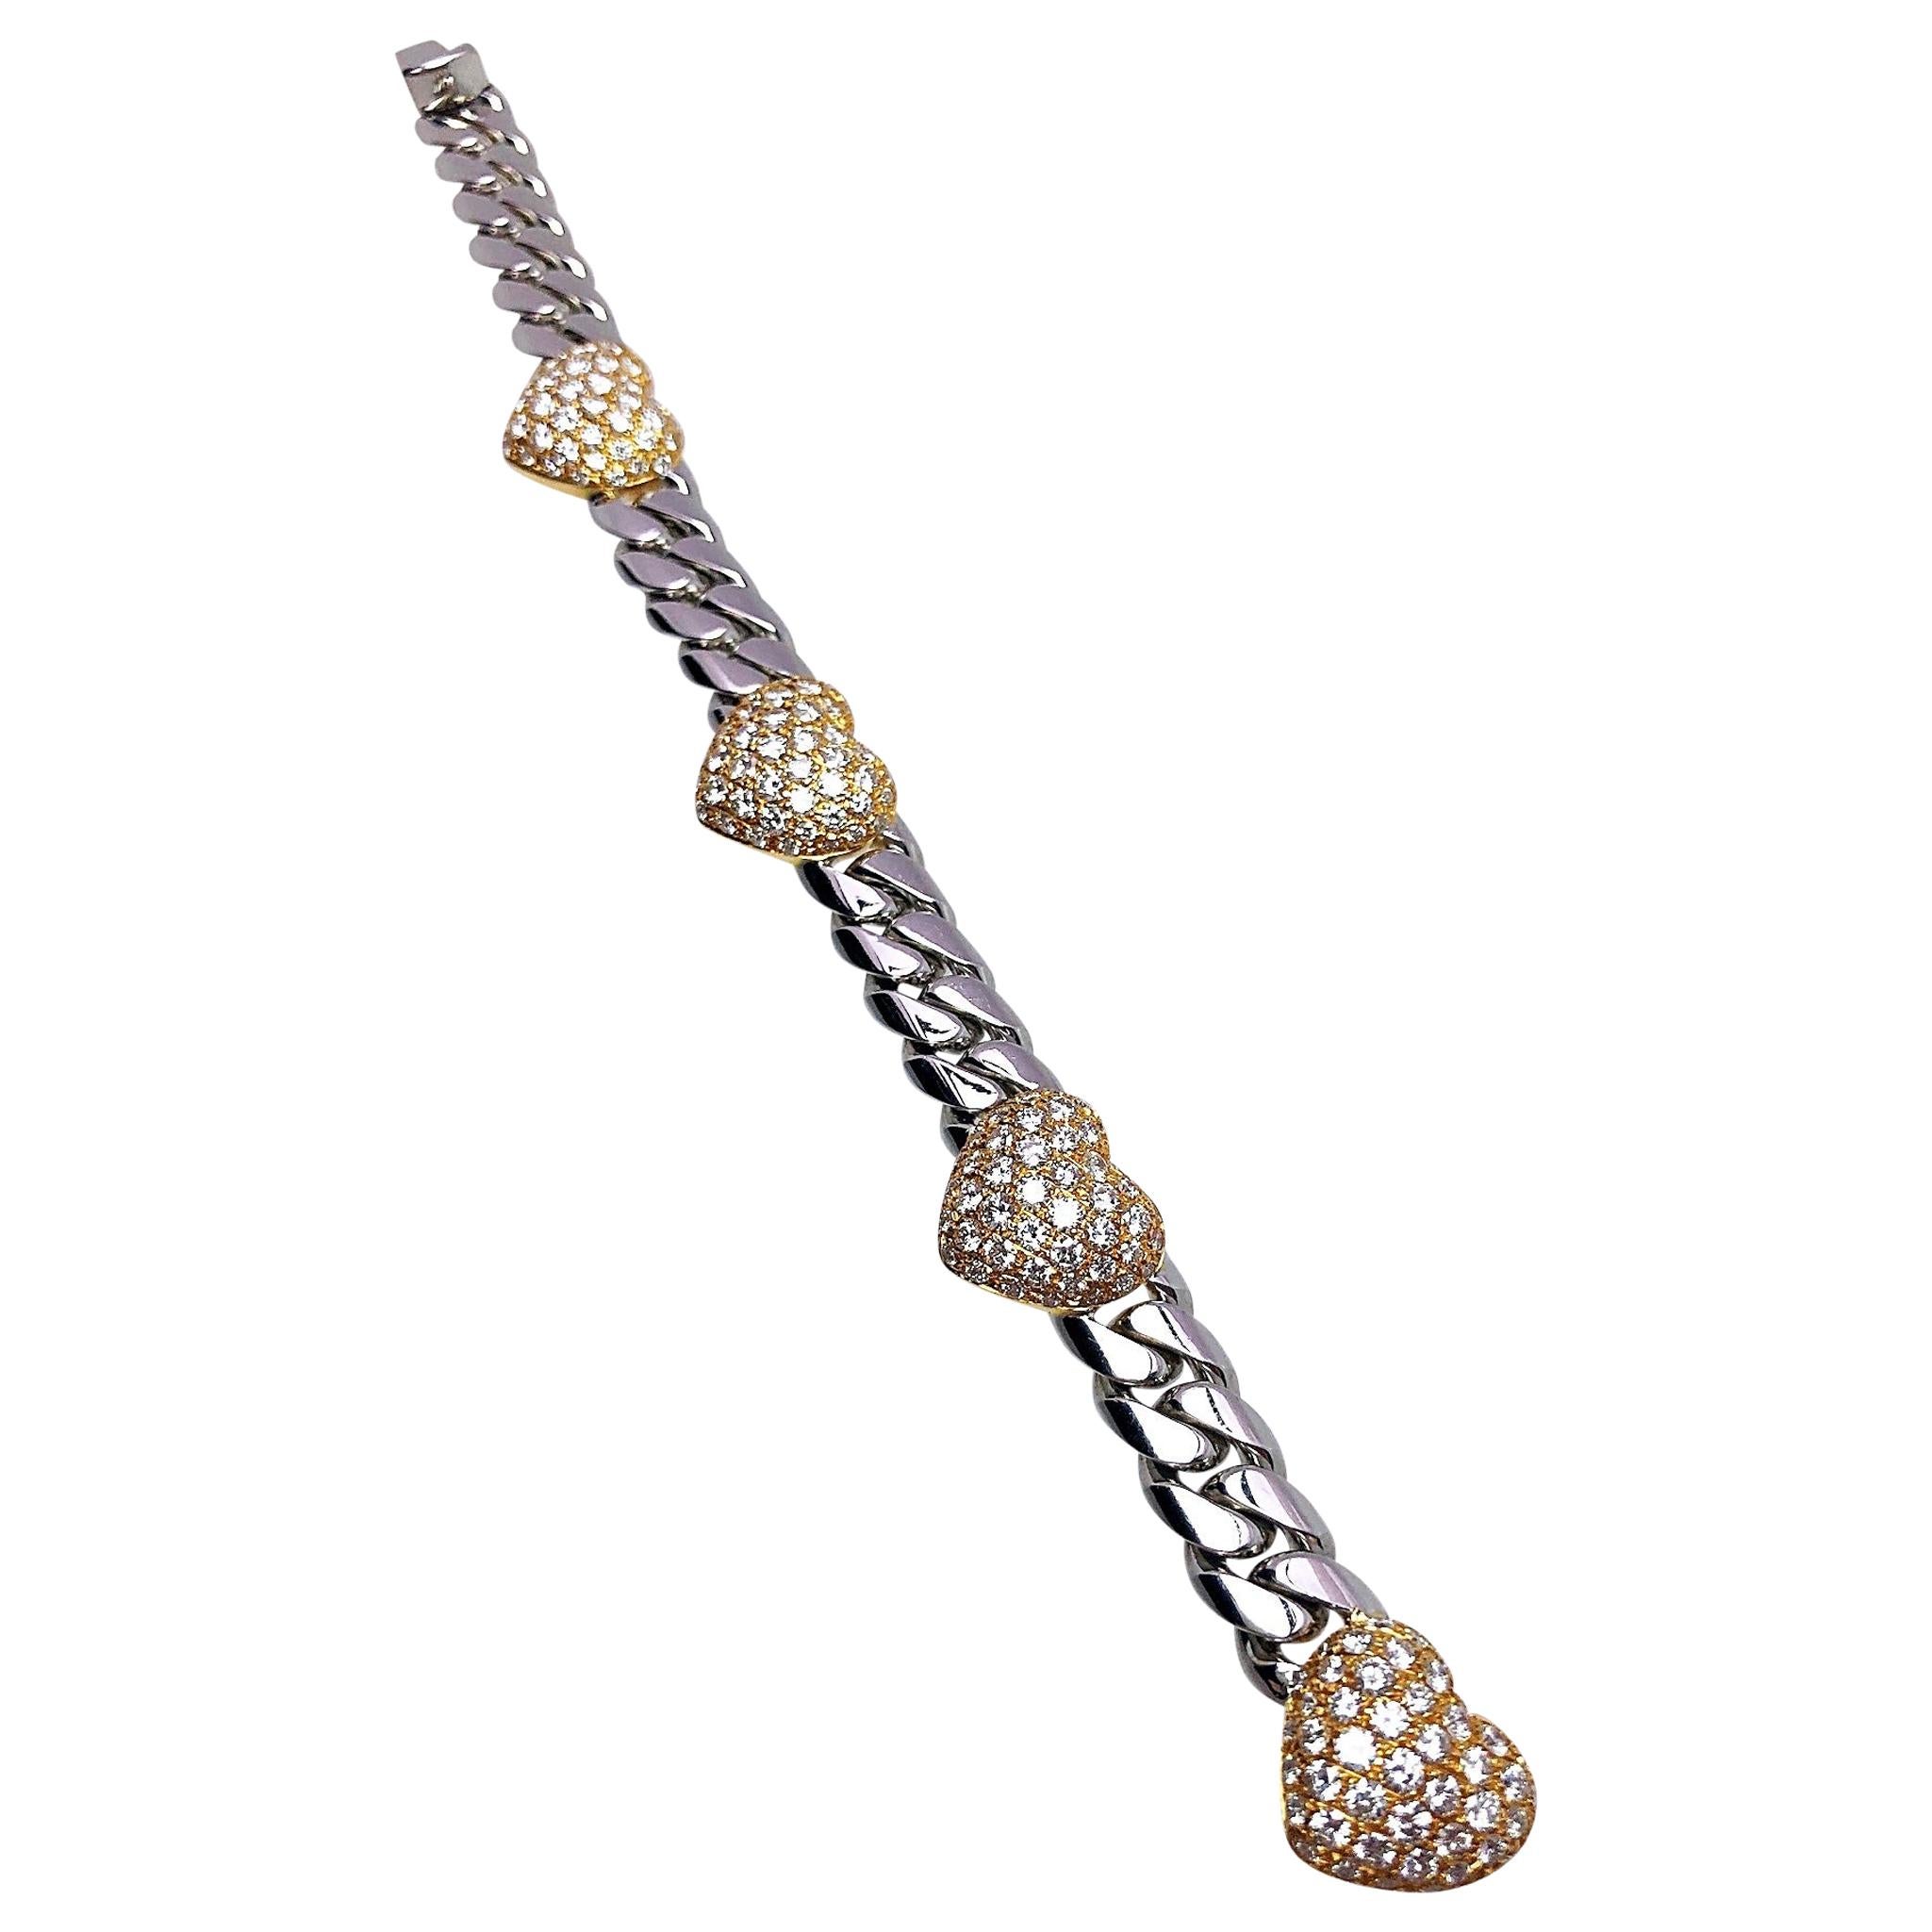 Brasolin 18KT White & Rose Gold Puffed heart Link Bracelet with 7.46CT. Diamonds For Sale